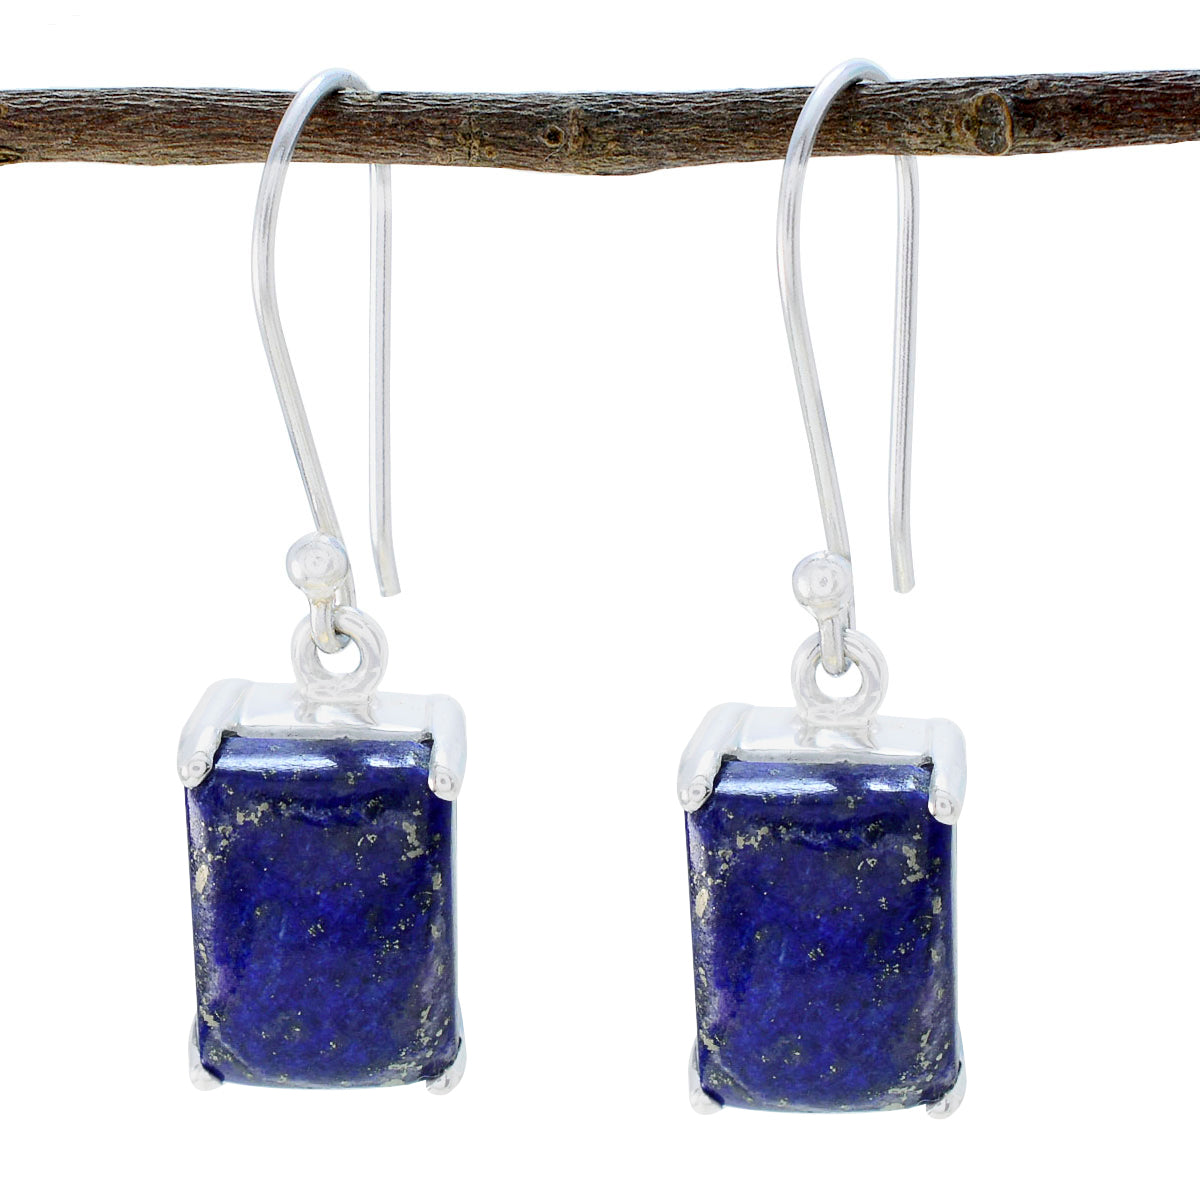 Riyo Natural Gemstone Octogon Cabochon Nevy Blue Lapis Lazuli Silver Earring gift for mothers day